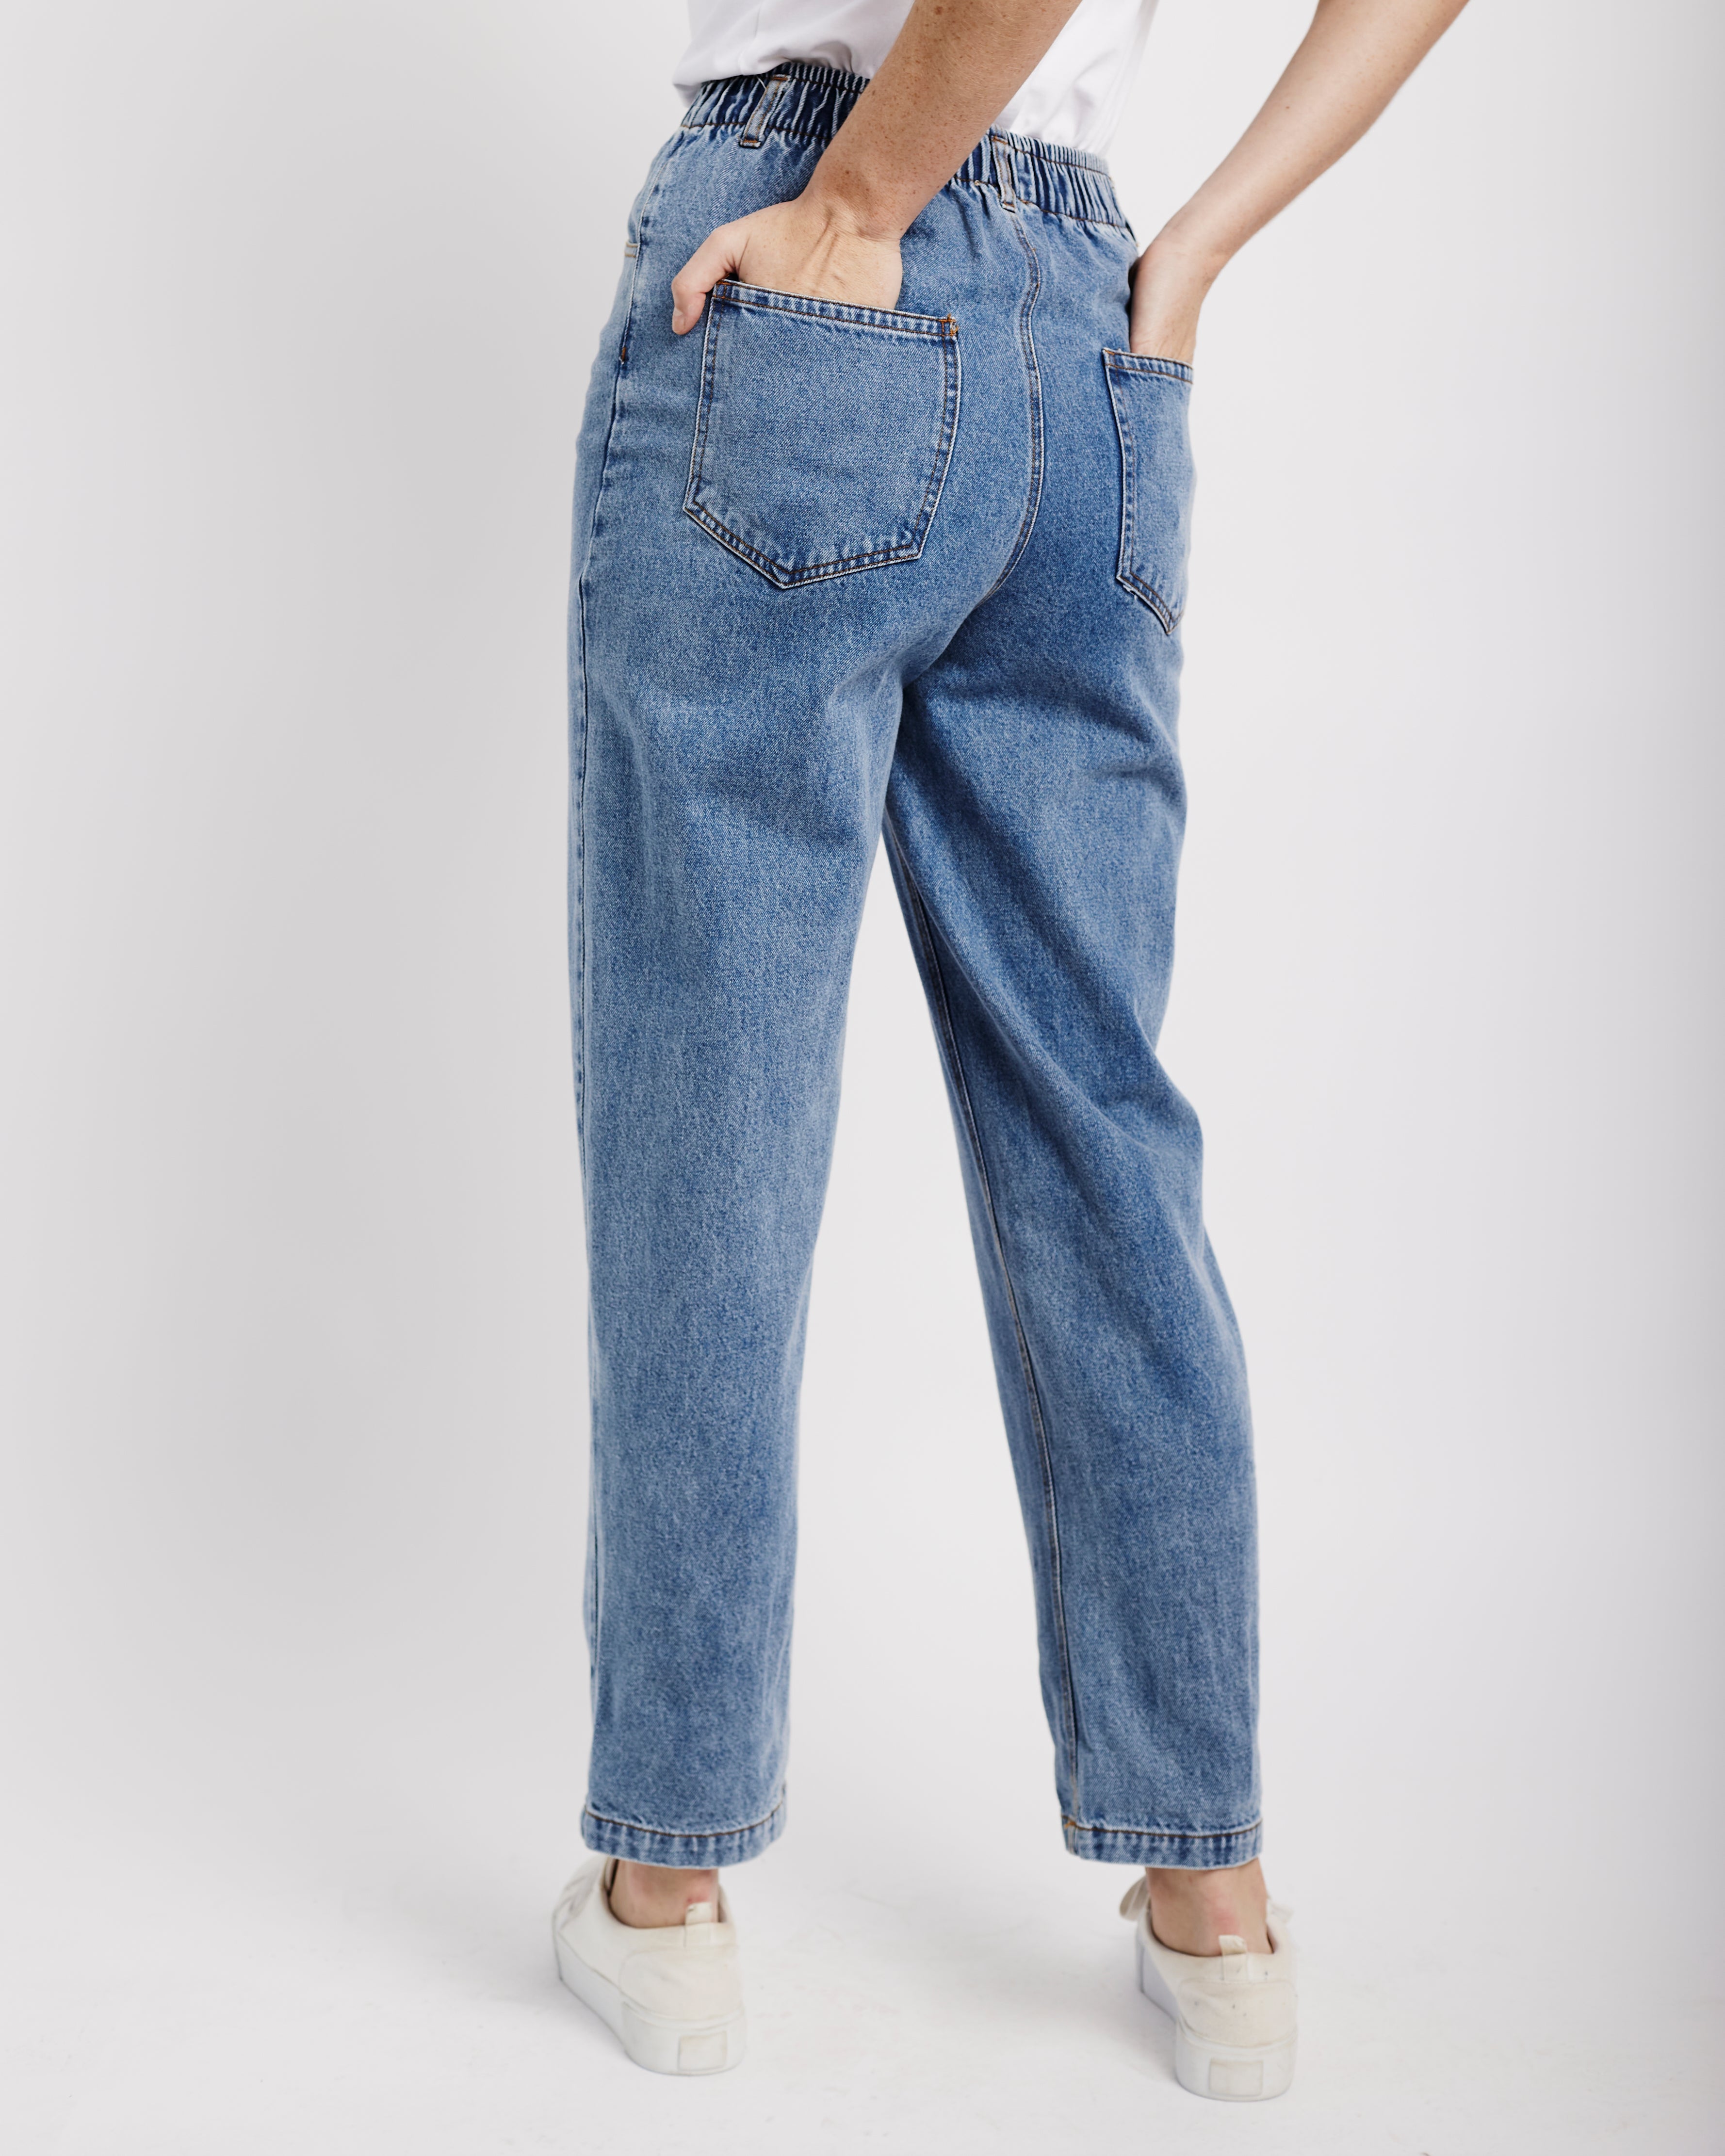 The FIX - Come thru mom jeans! 👖👖 Add a lil new-new to your denims with 3  styles to choose from. Save R100 when you buy 2! T&C apply. Shop in-store or